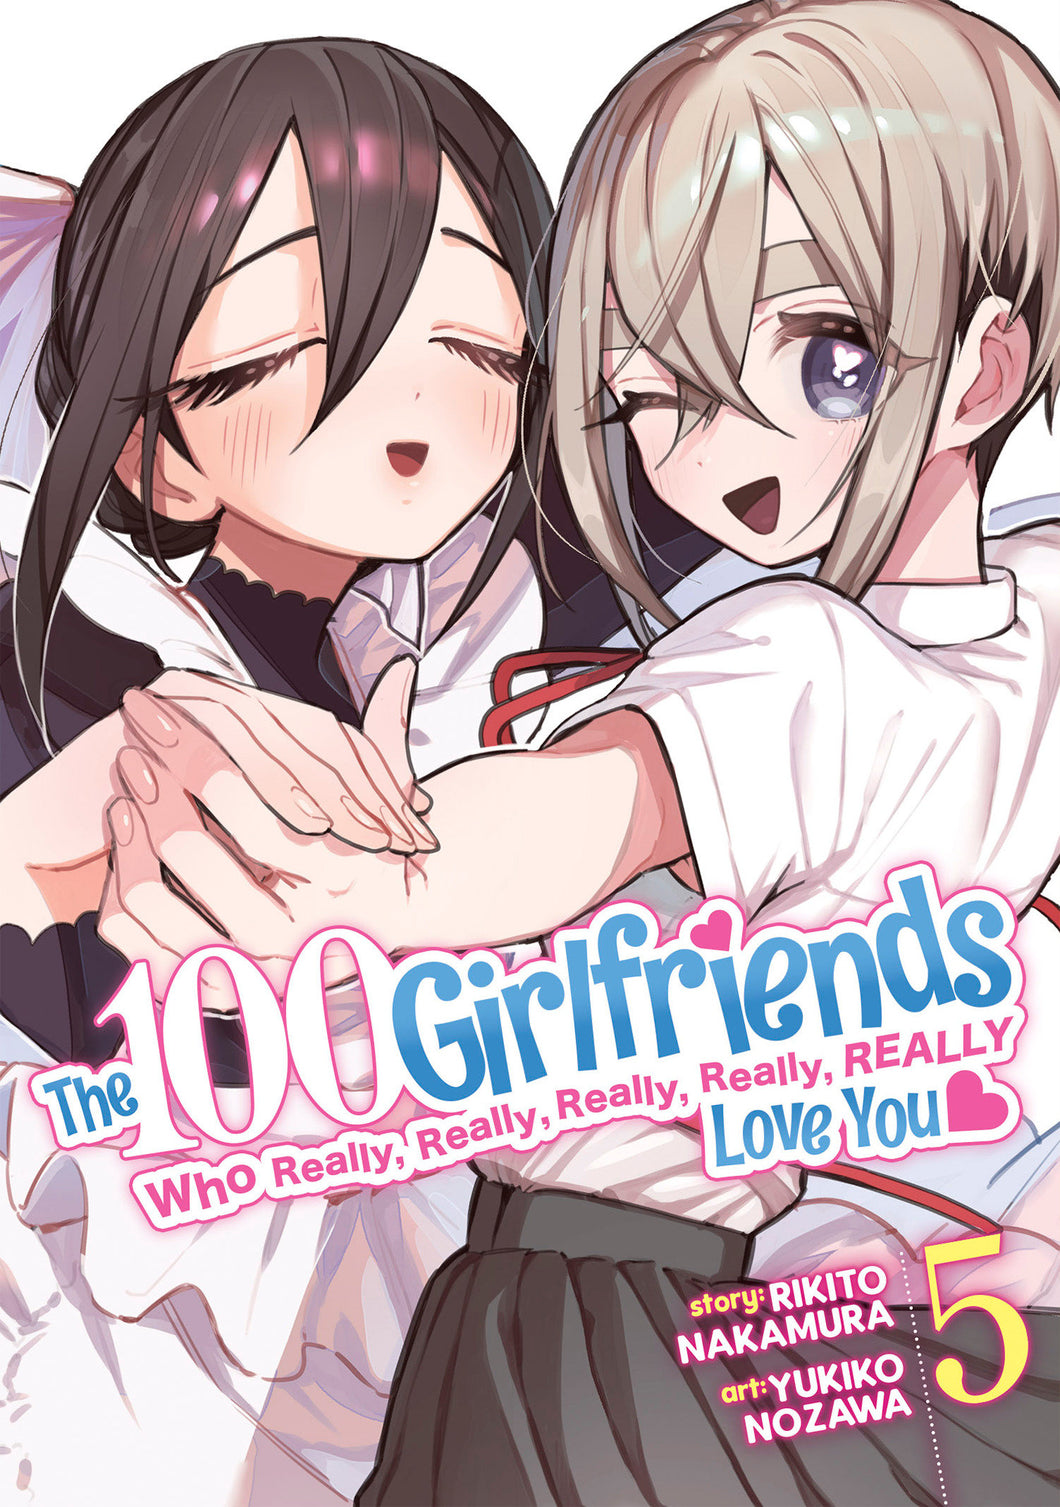 The 100 Girlfriends Who Really, Really, Really, Really, Really Love You Vol. 5